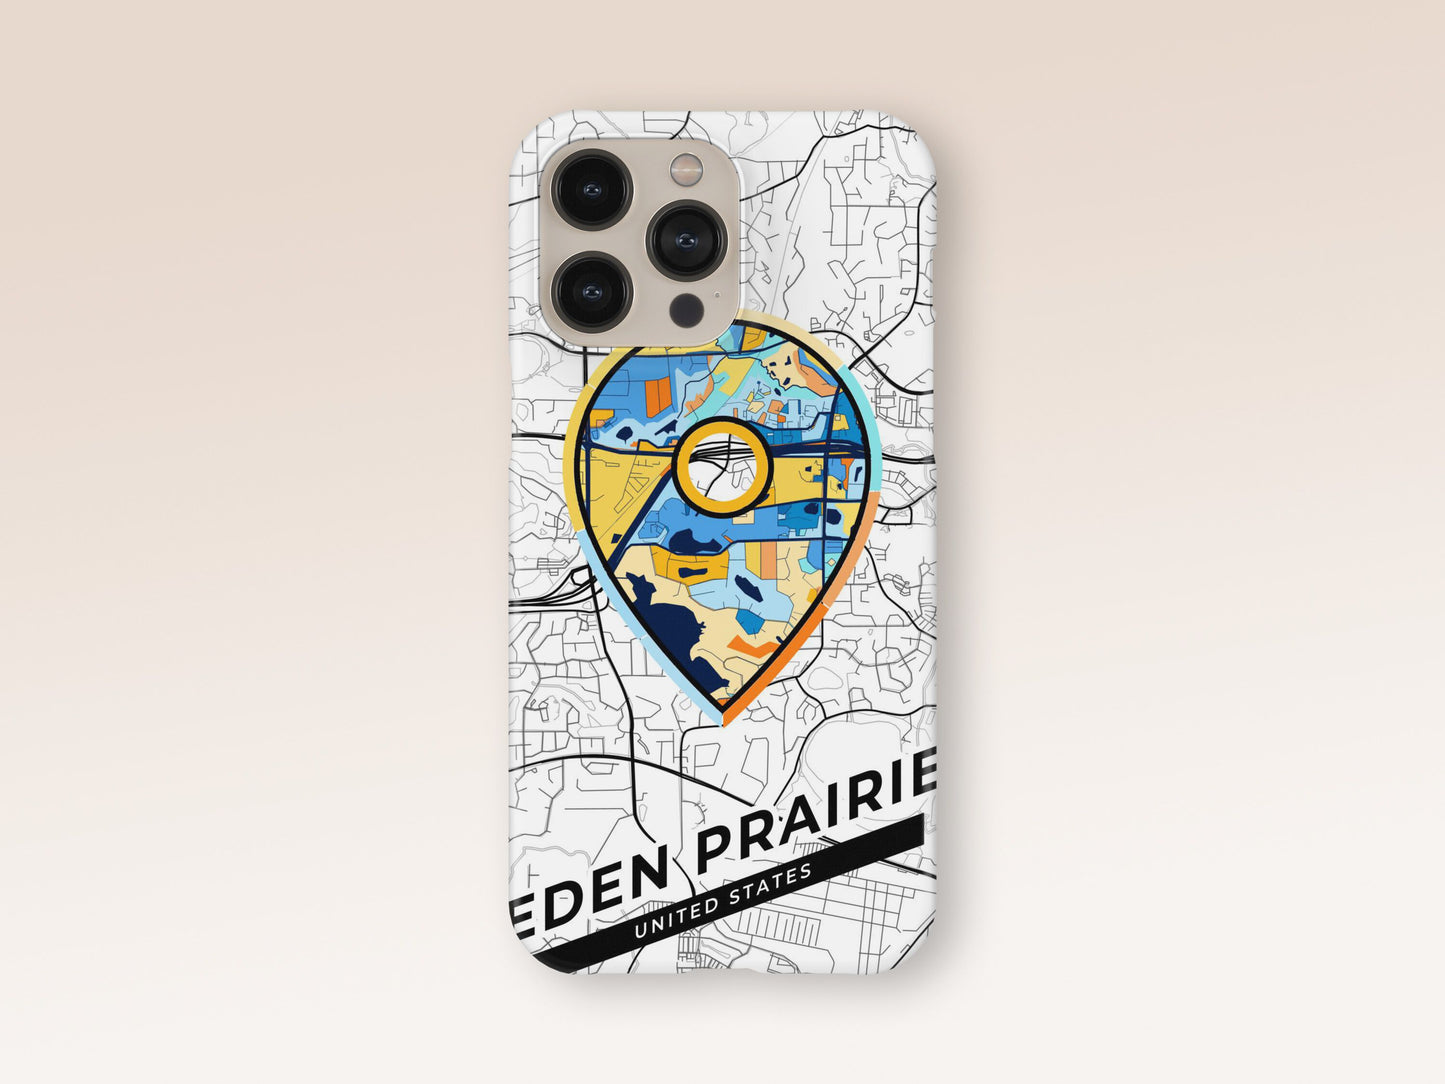 Eden Prairie Minnesota slim phone case with colorful icon. Birthday, wedding or housewarming gift. Couple match cases. 1